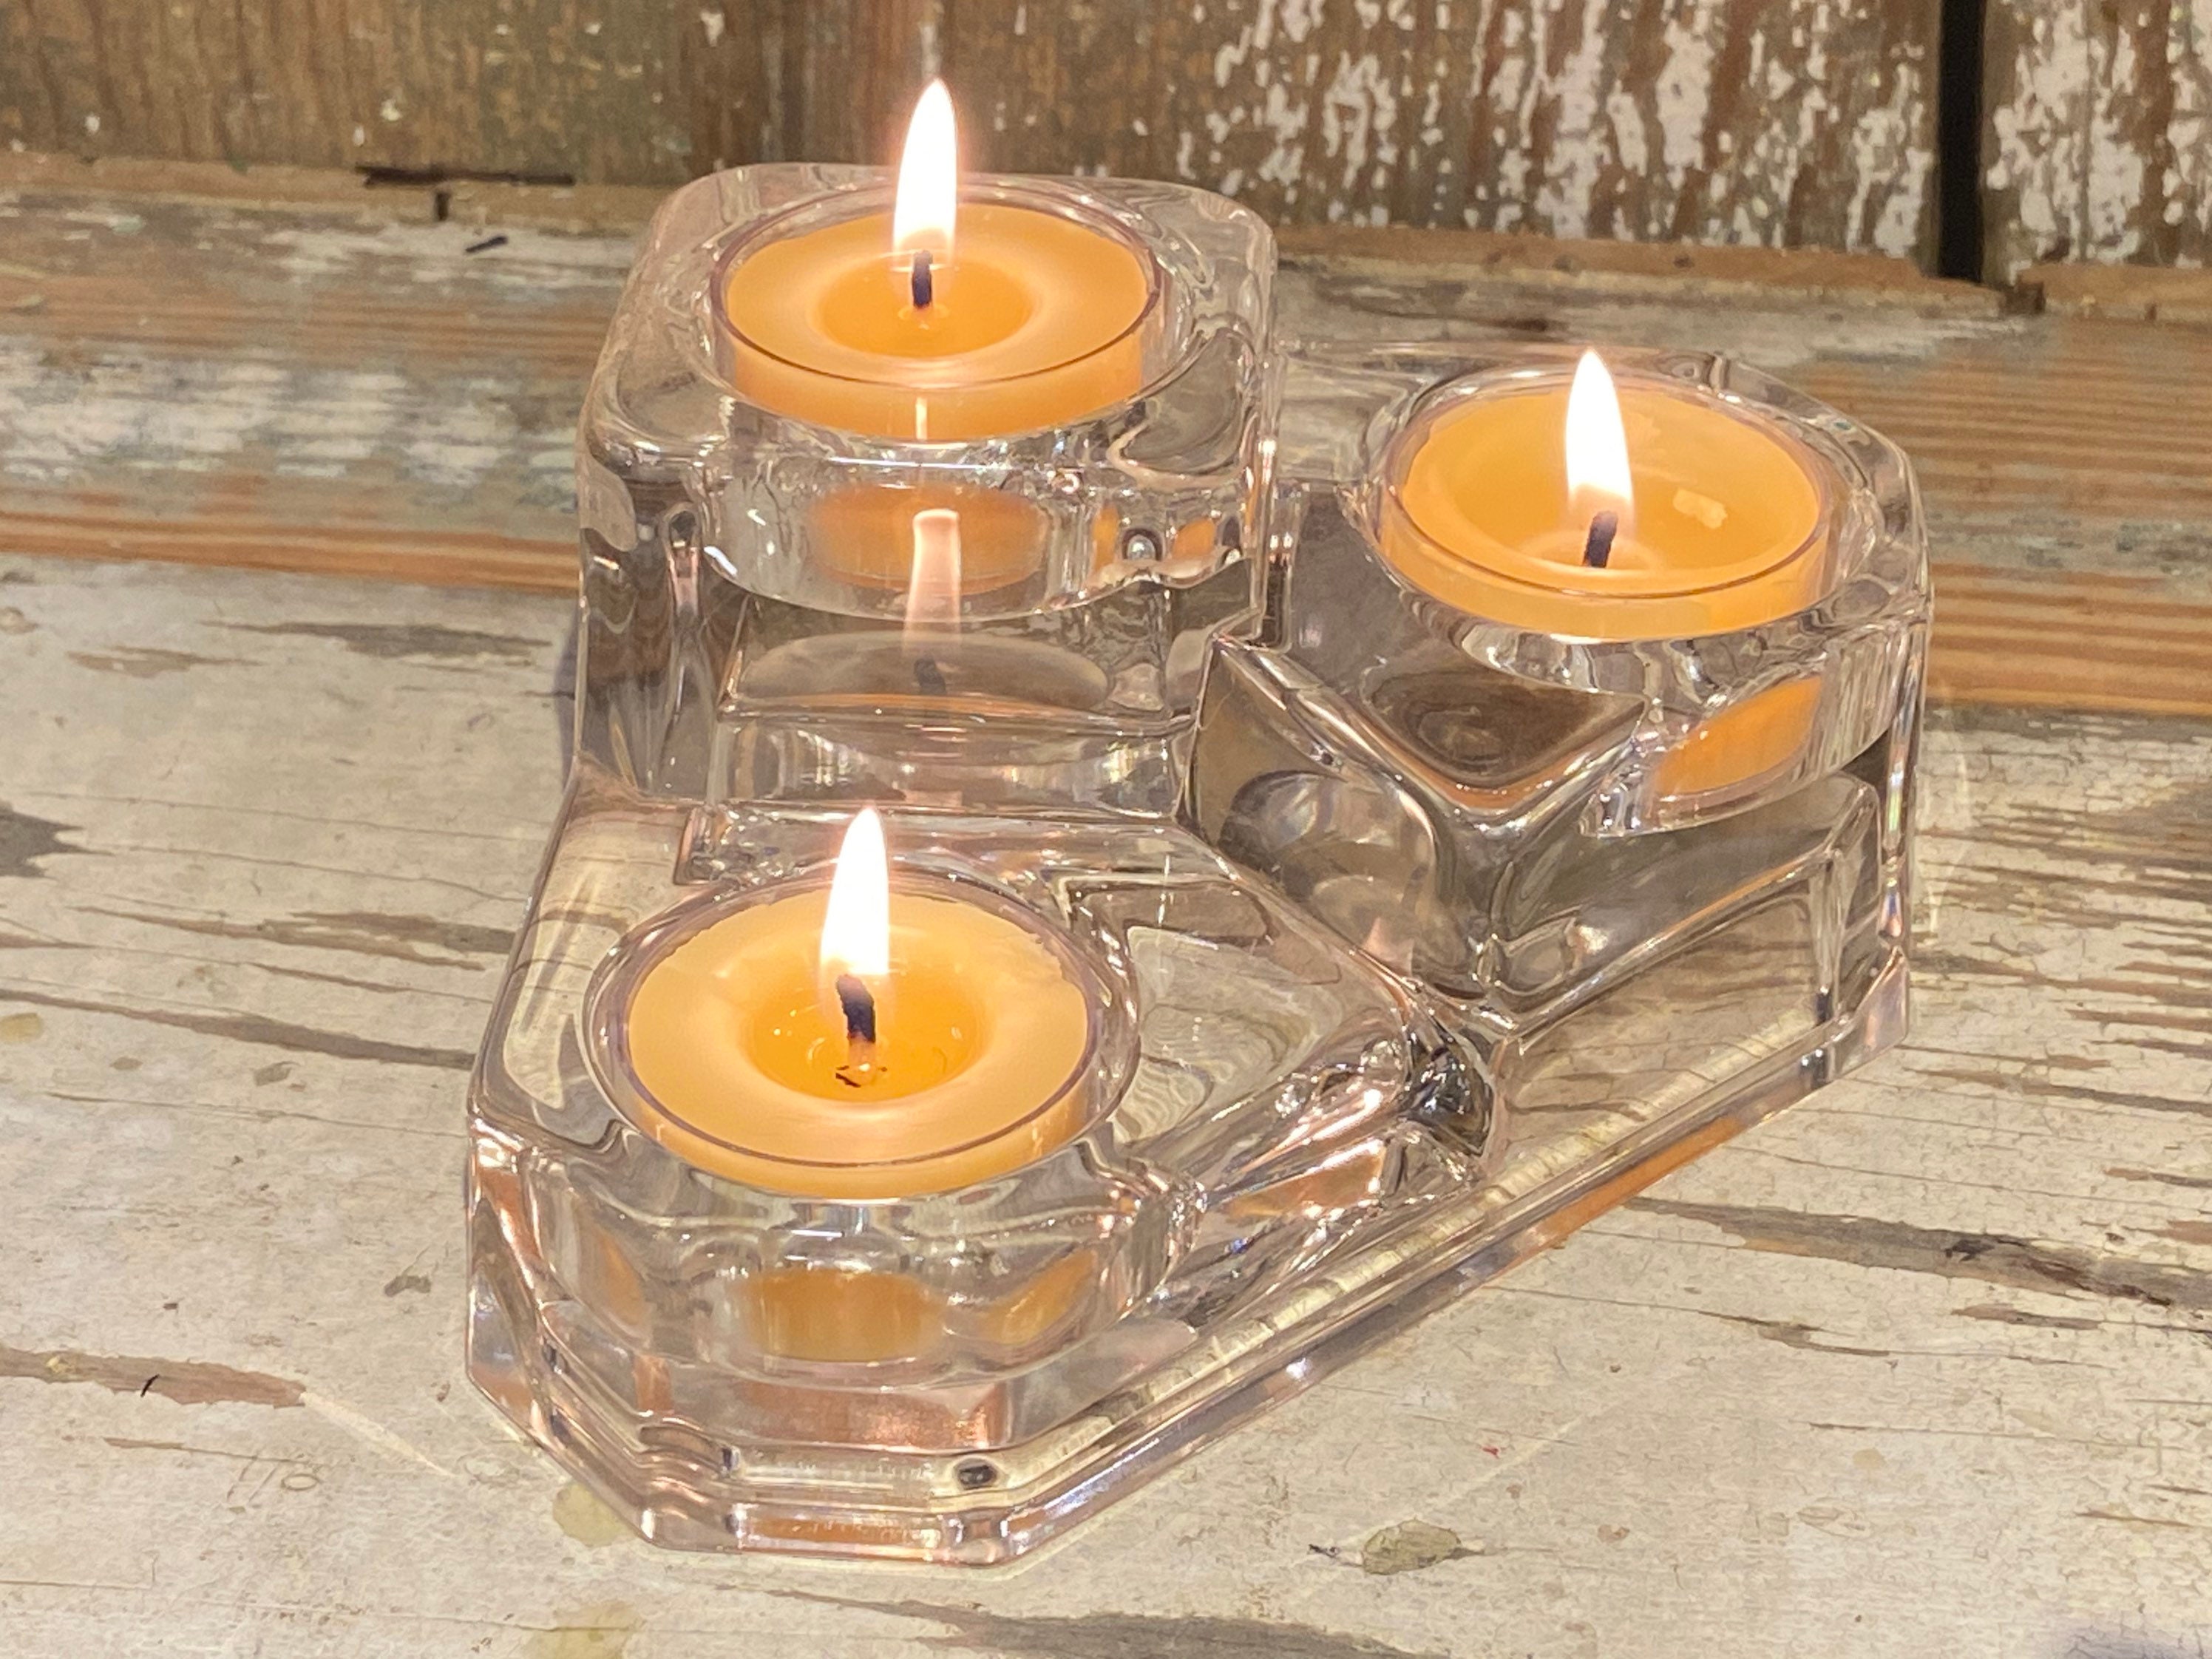 Bulk Beeswax Tealight Candles Pure Beeswax Candles From Beekeepers Hive 